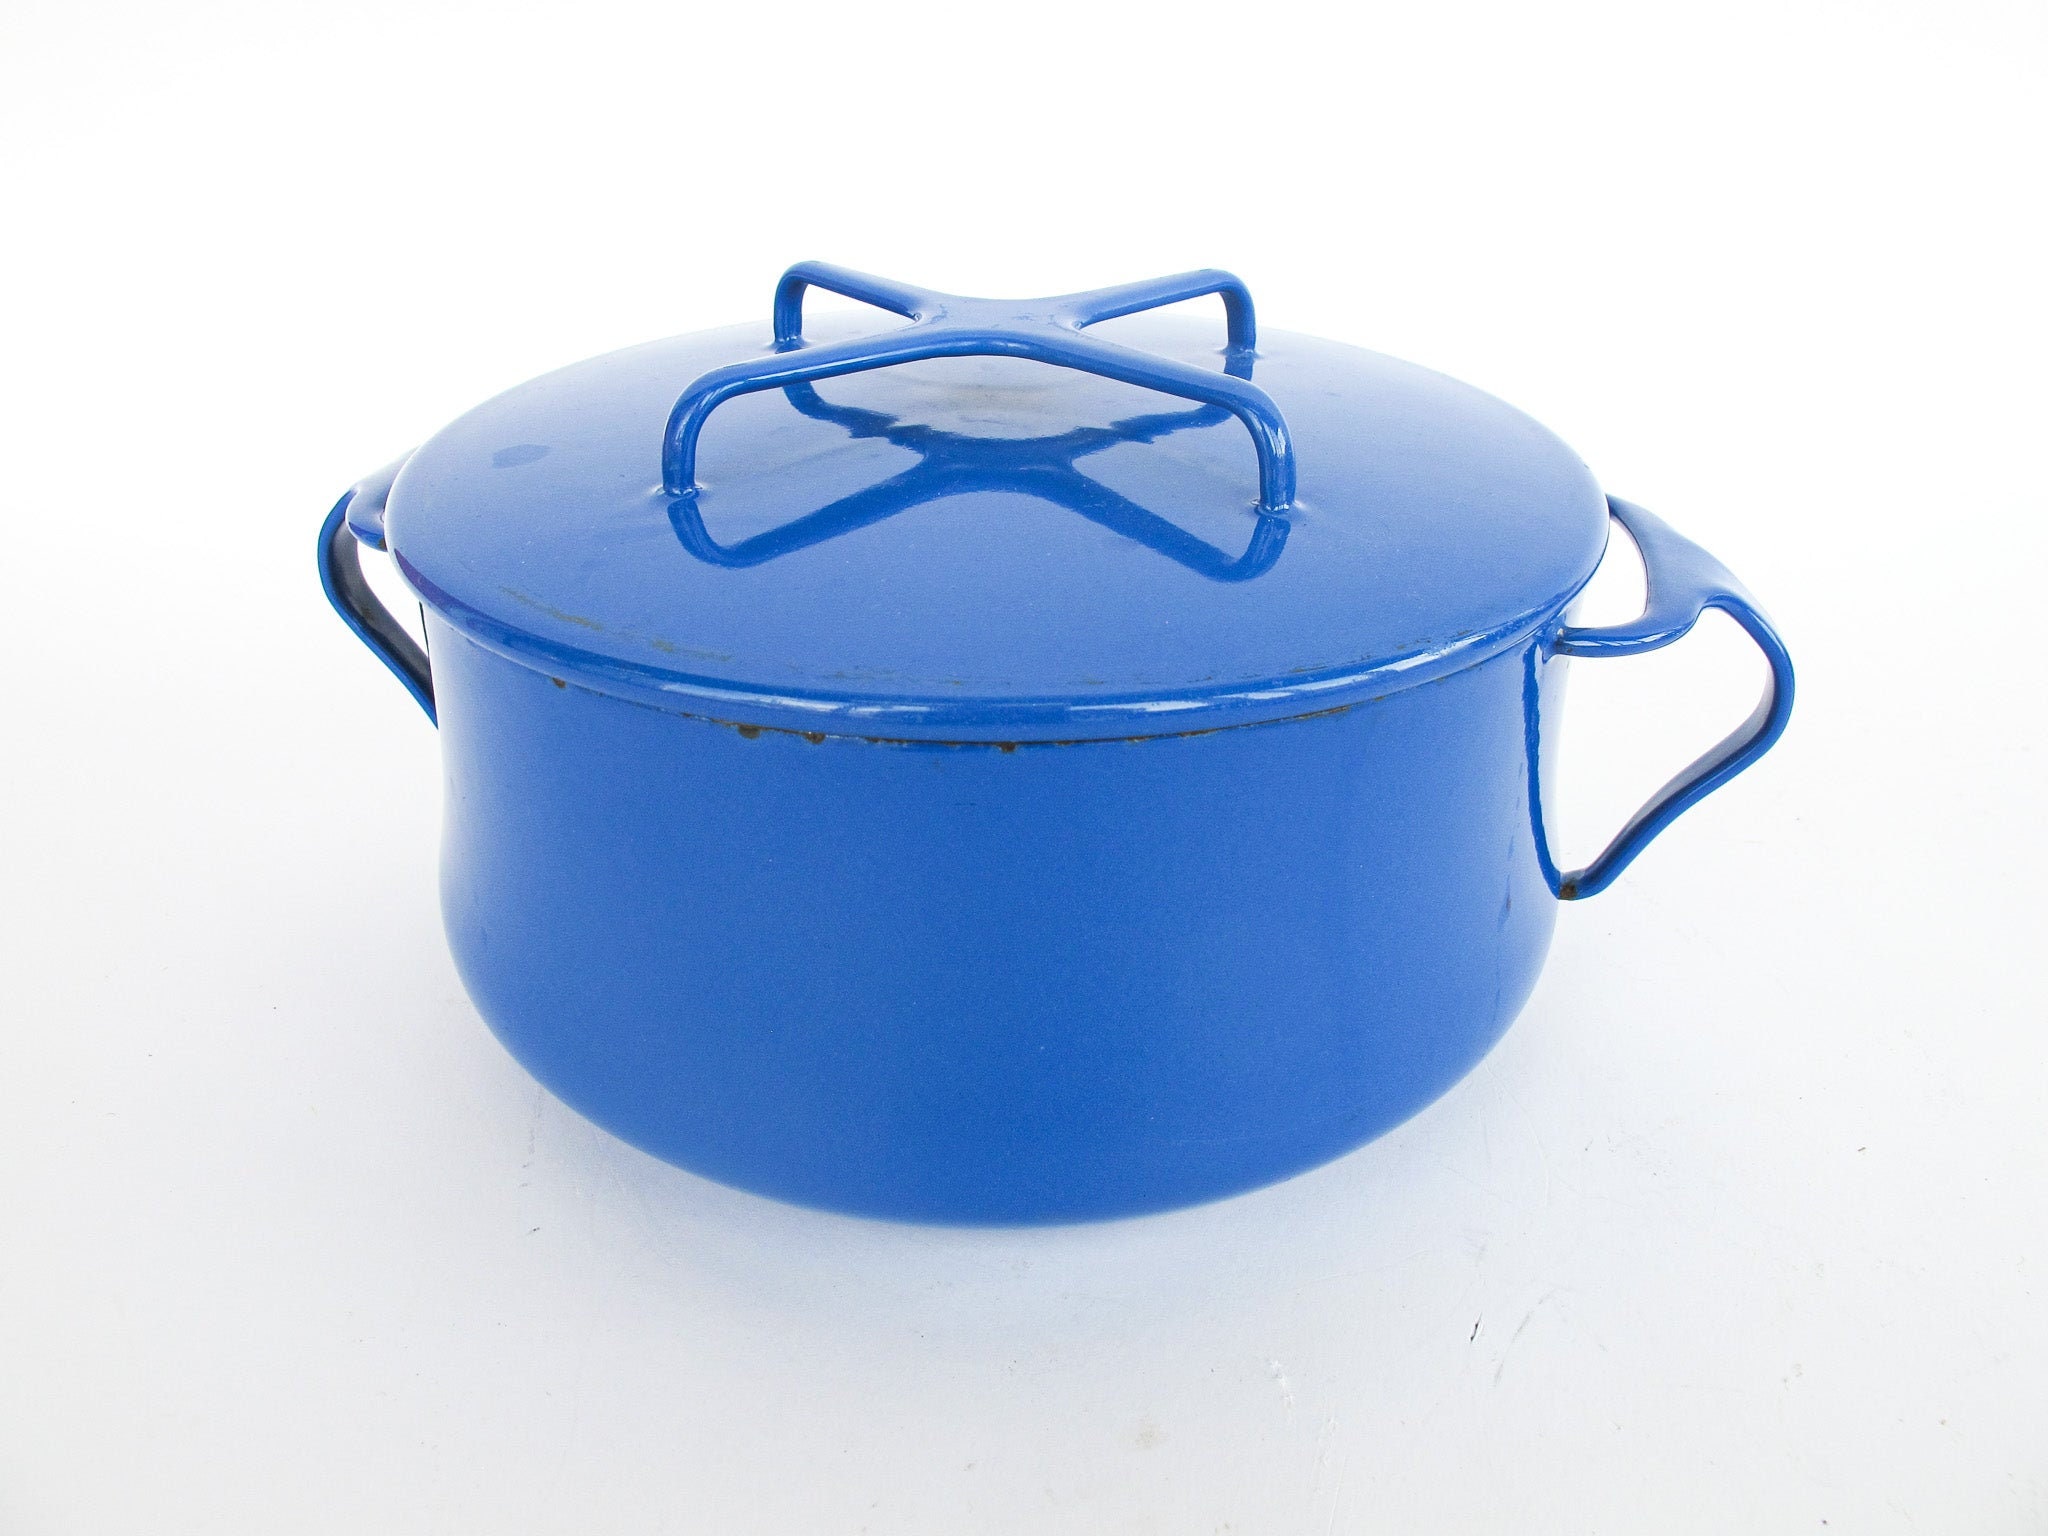 Midcentury Blue Small Dansk French Cook Pot With Lid -  Denmark